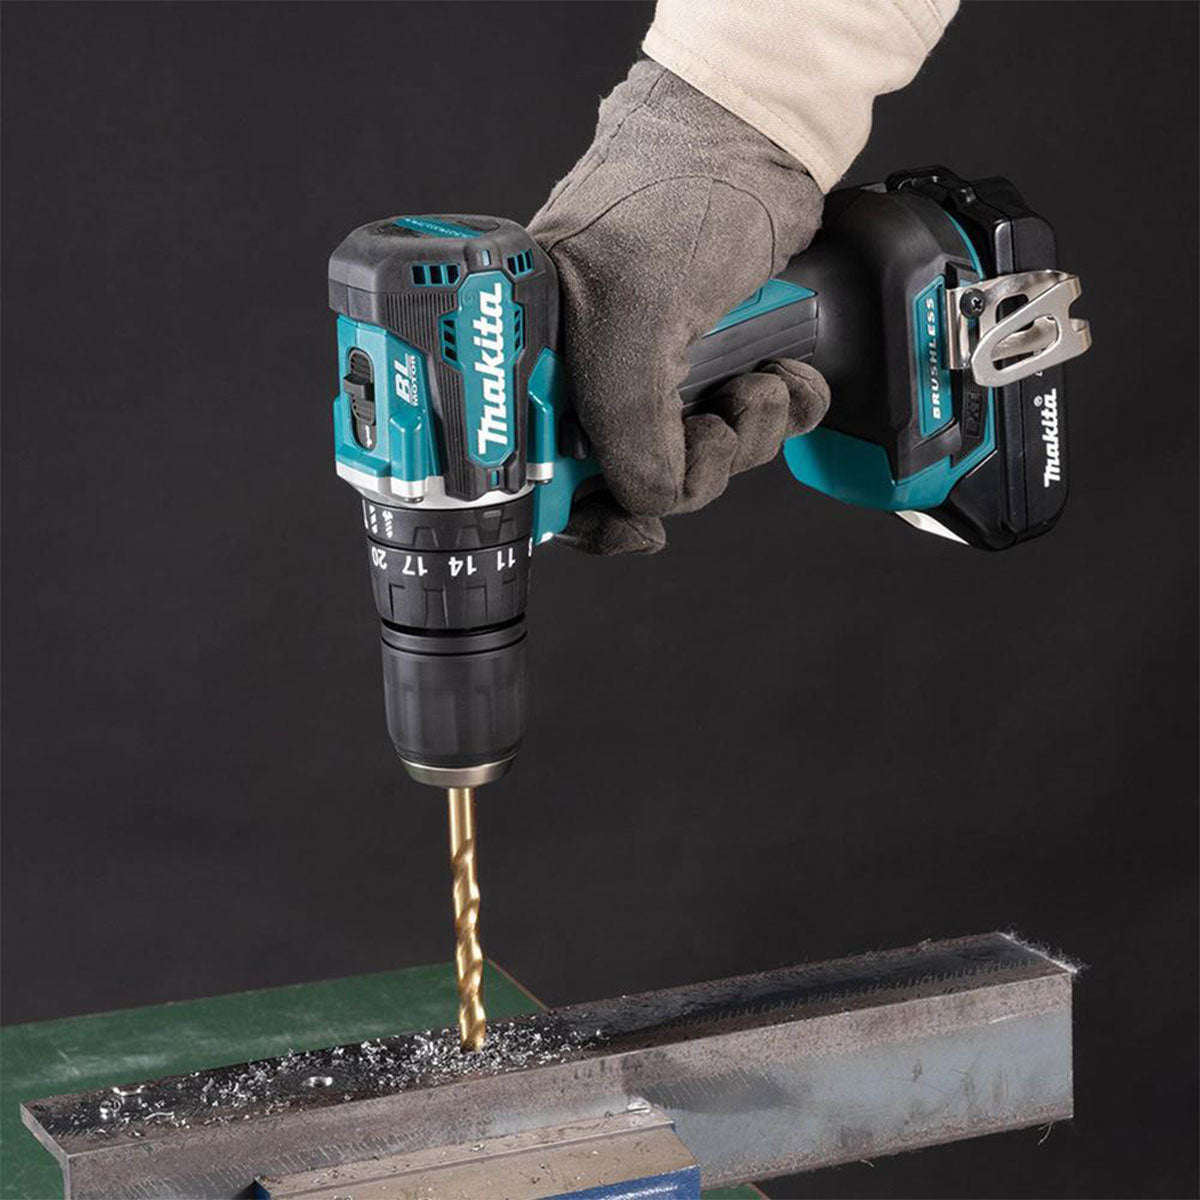 Makita DHP487Z 18V LXT Brushless Combi Drill Body Only (Battery & Charger Not Included)